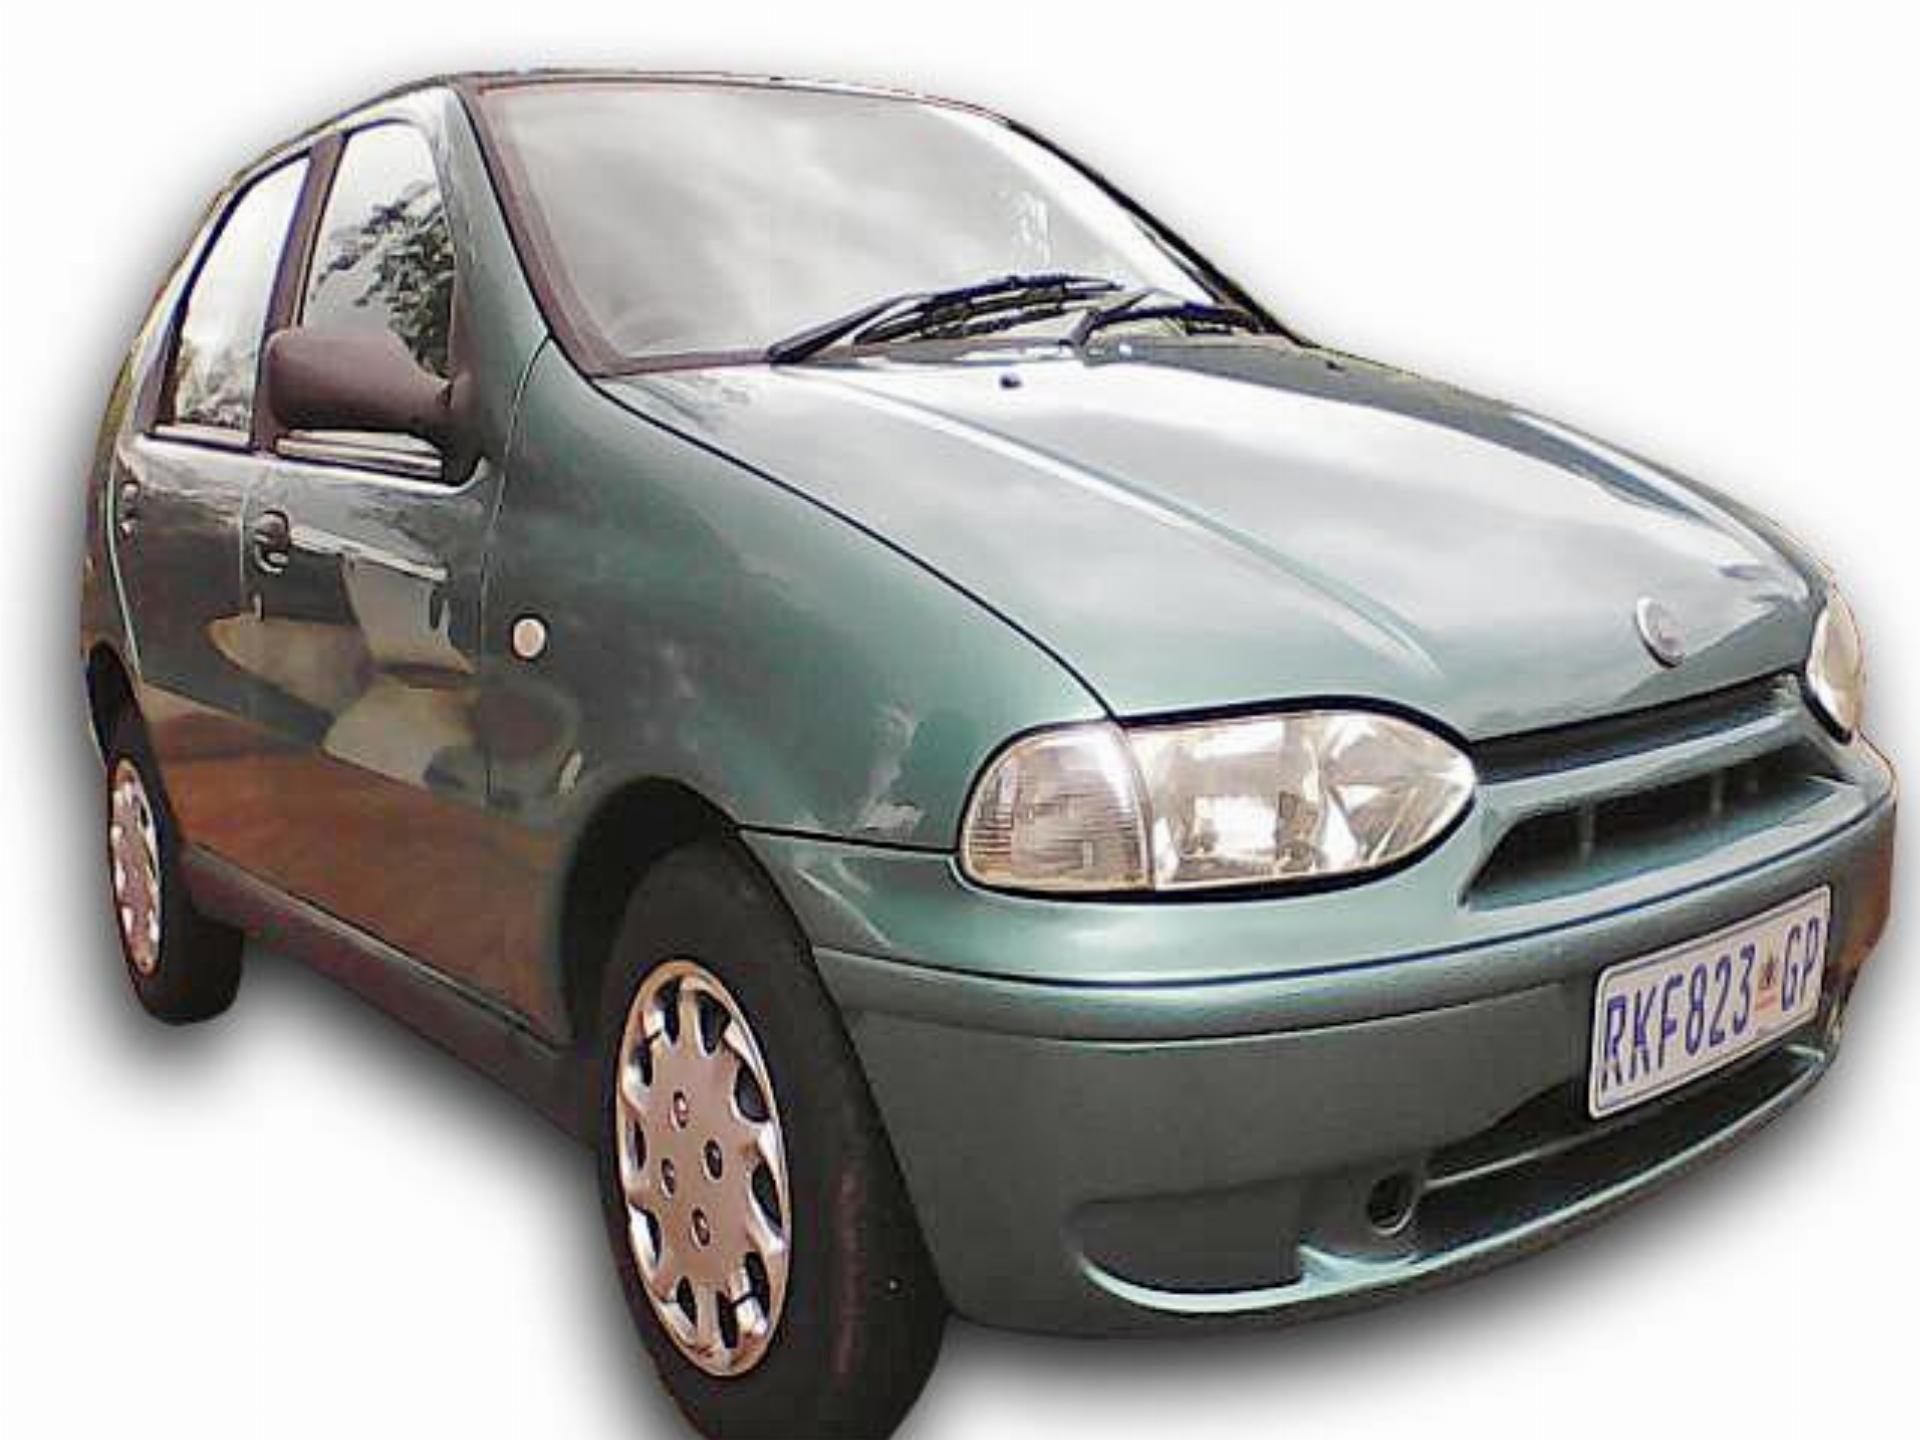 Used Fiat Palio 1.2 EL 5DR 2004 on auction PV1013469